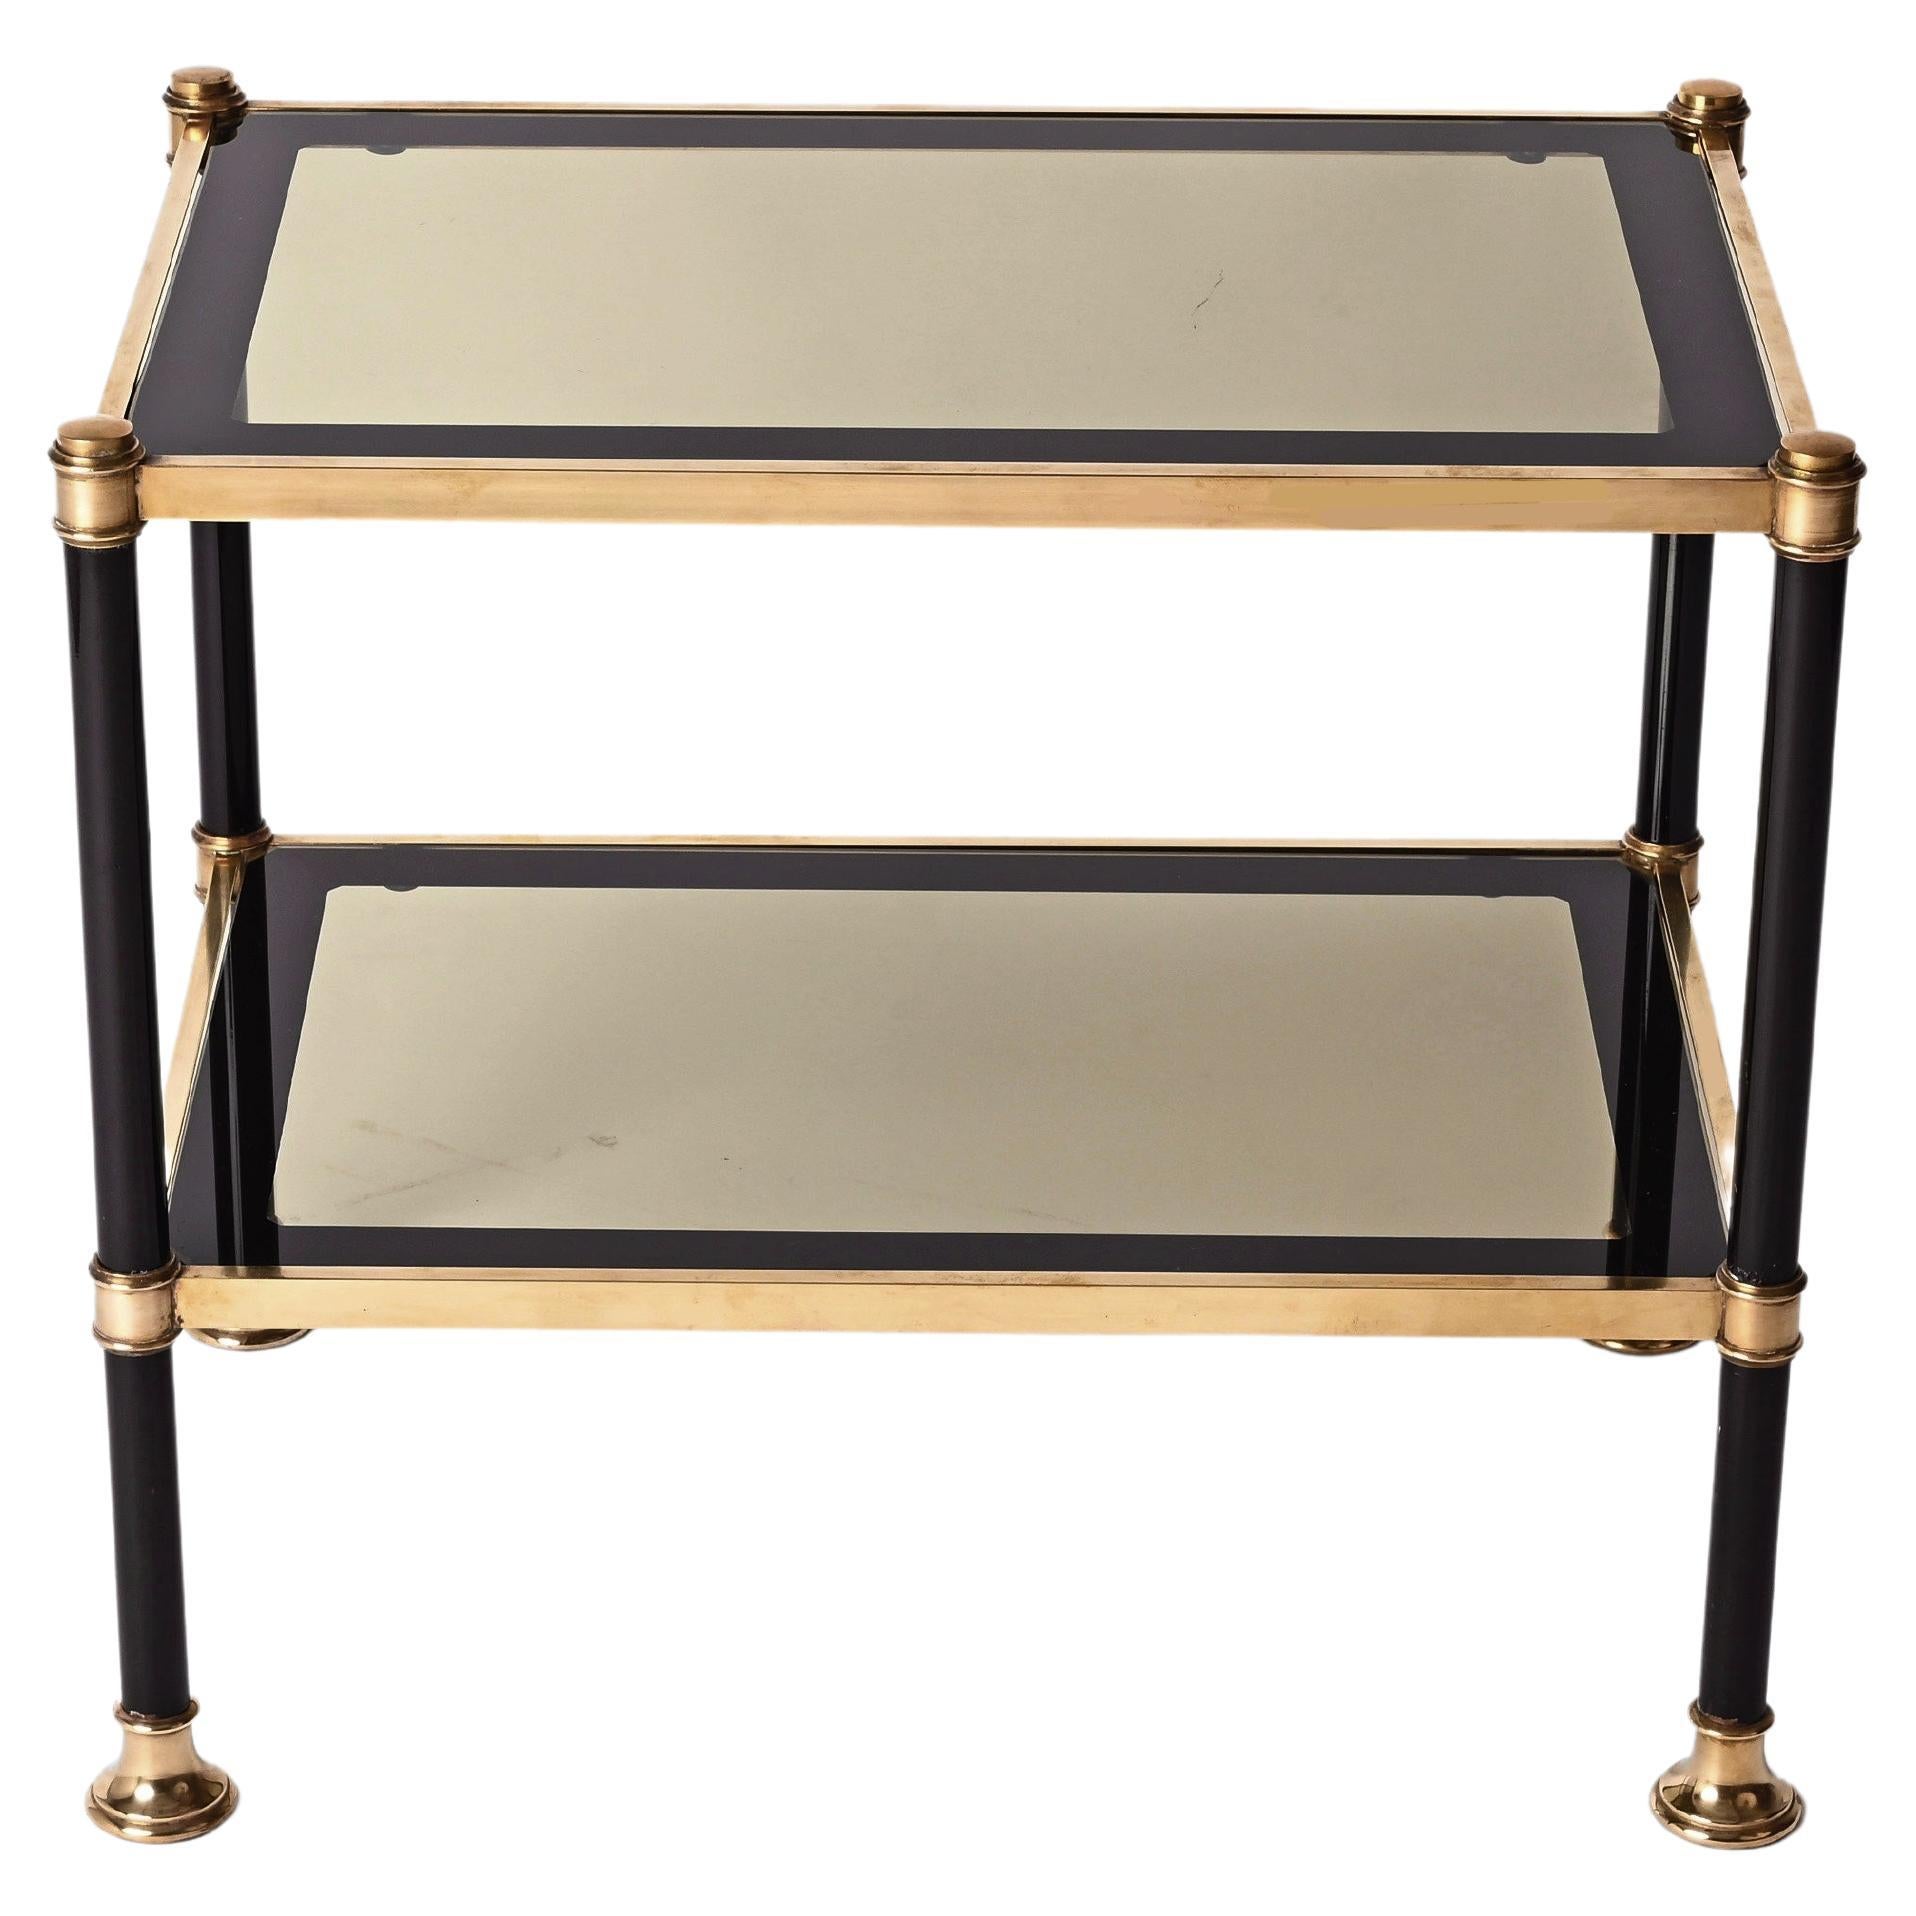 Italian Midcentury Brass and Black Metal Rectangular Coffee Table with Smoked Glass 1970 For Sale